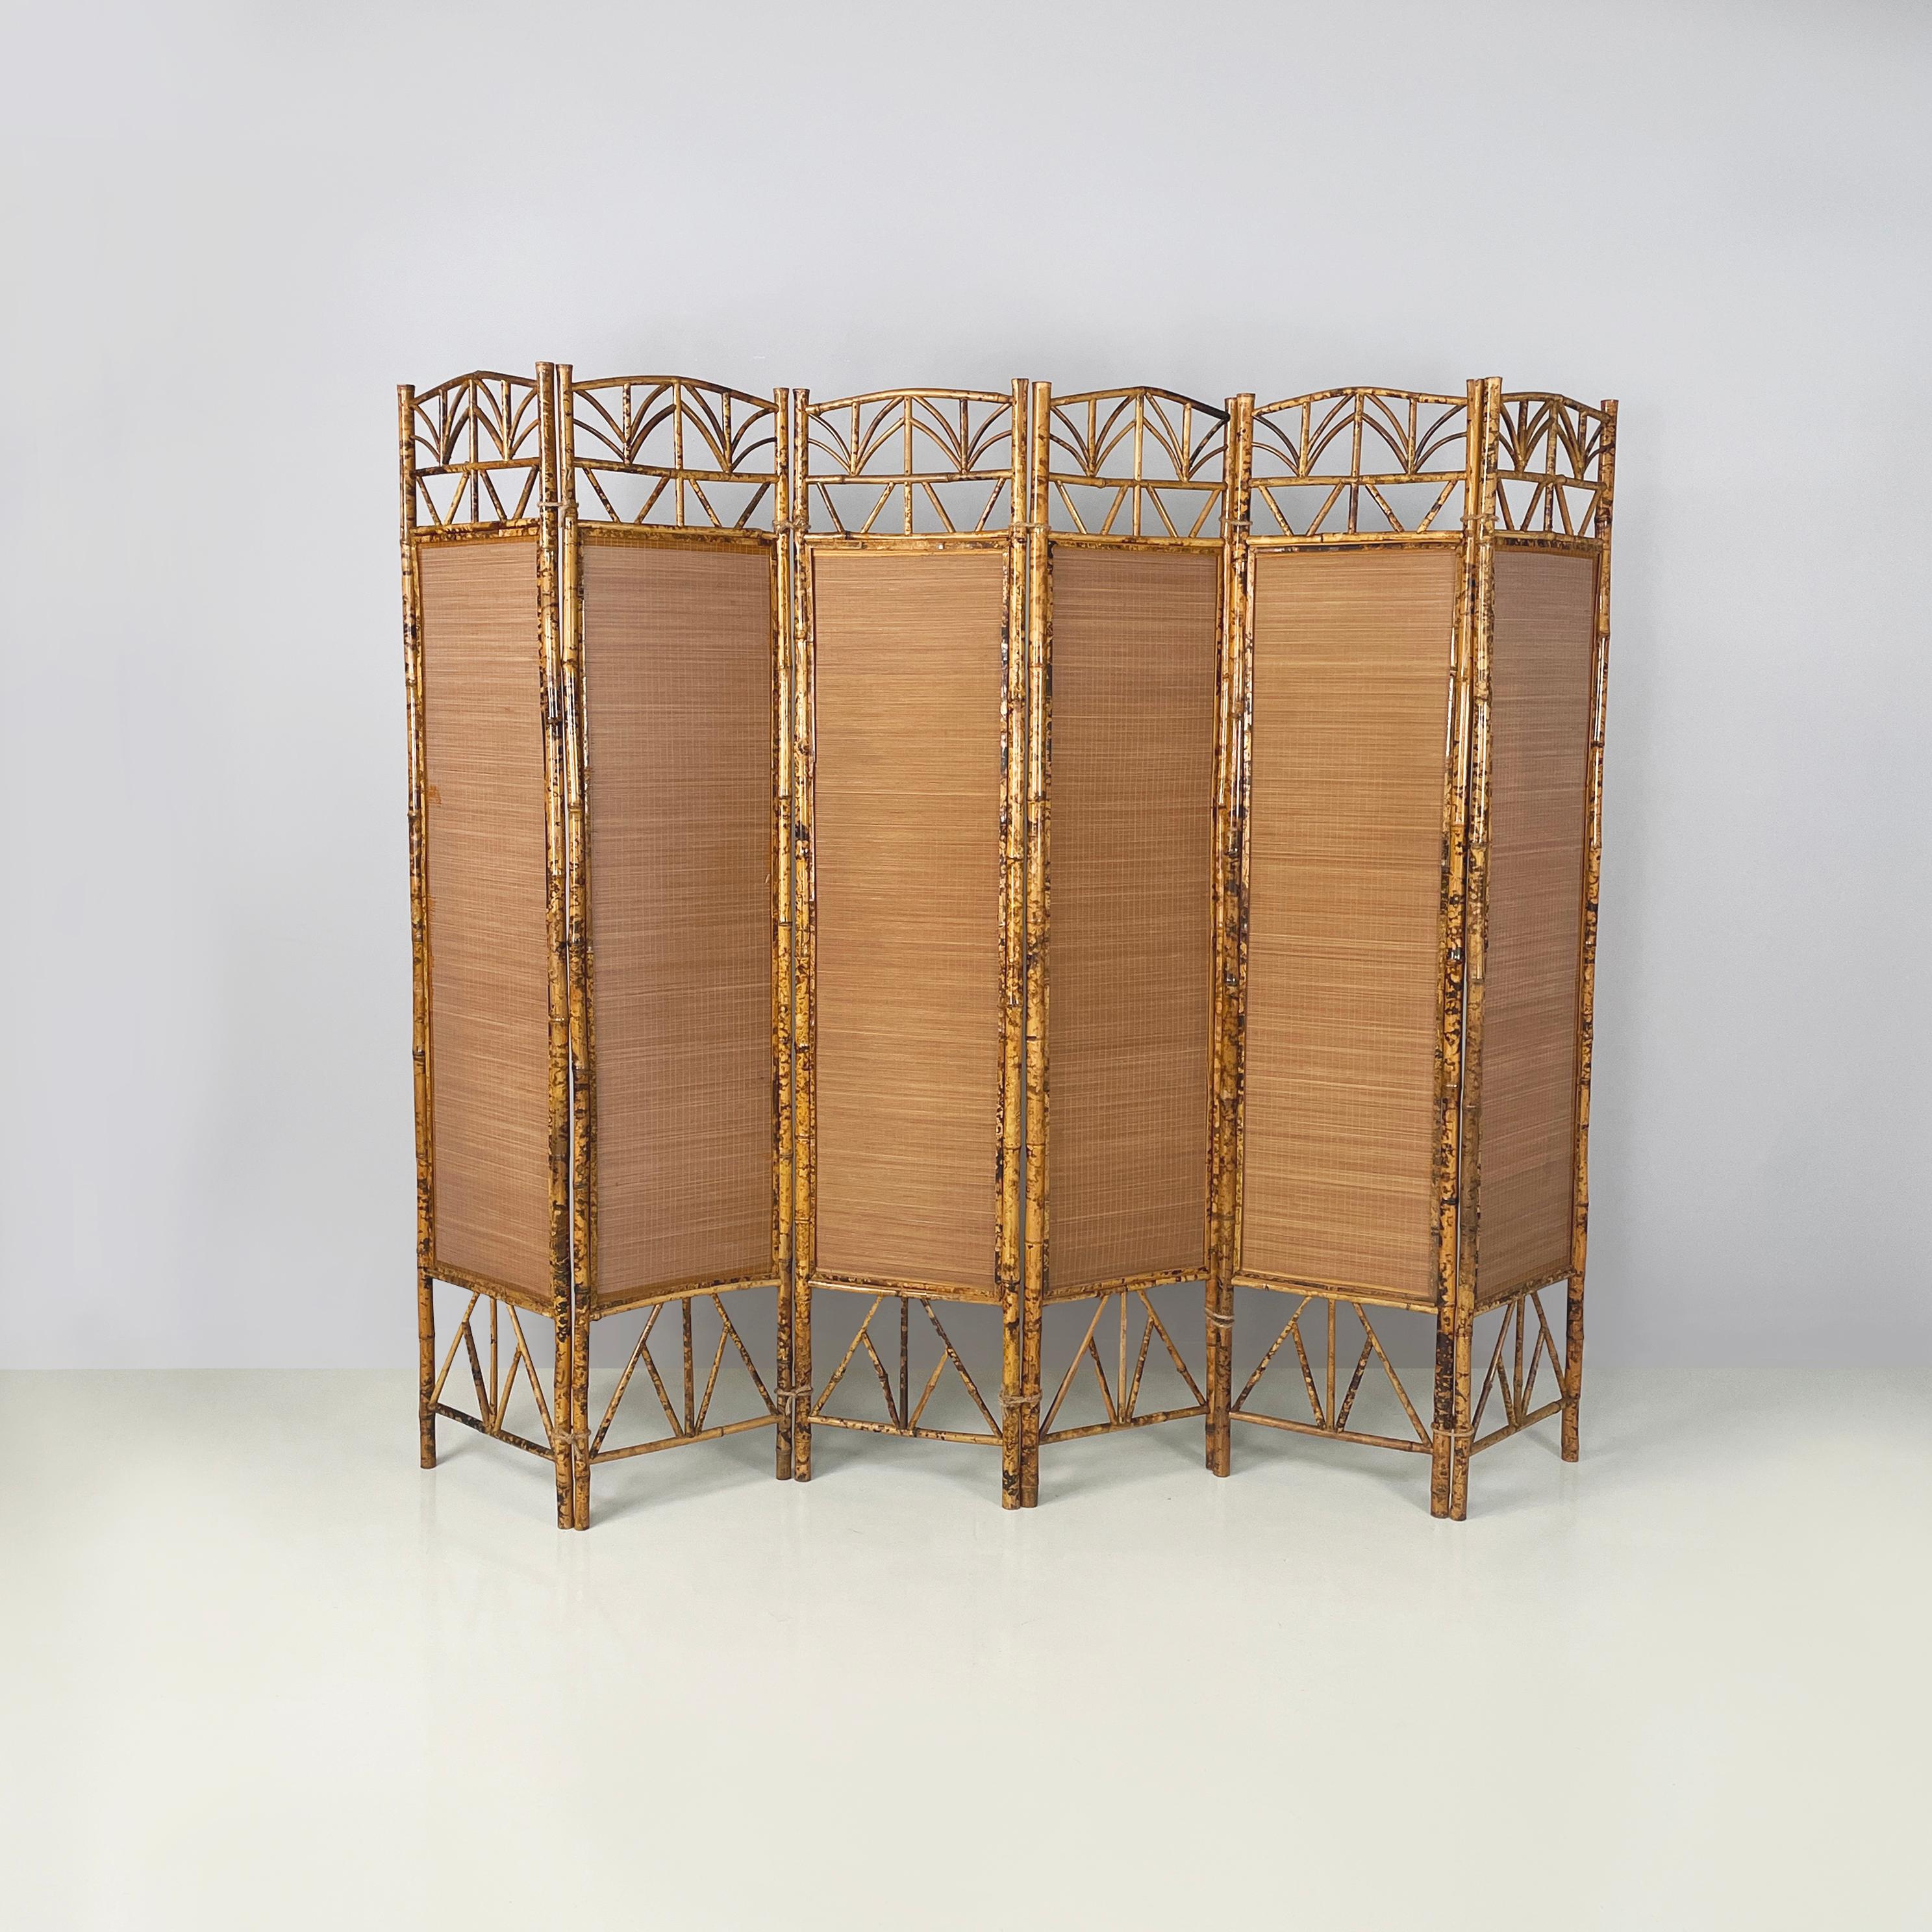 Italian mid-century modern Screen in bamboo and rattan, 1950s
Screen composed of 6 rectangular panels in bamboo and rattan. The structure in the upper and lower part has parts decorated with curved bamboo. In the center there is a rectangular rattan